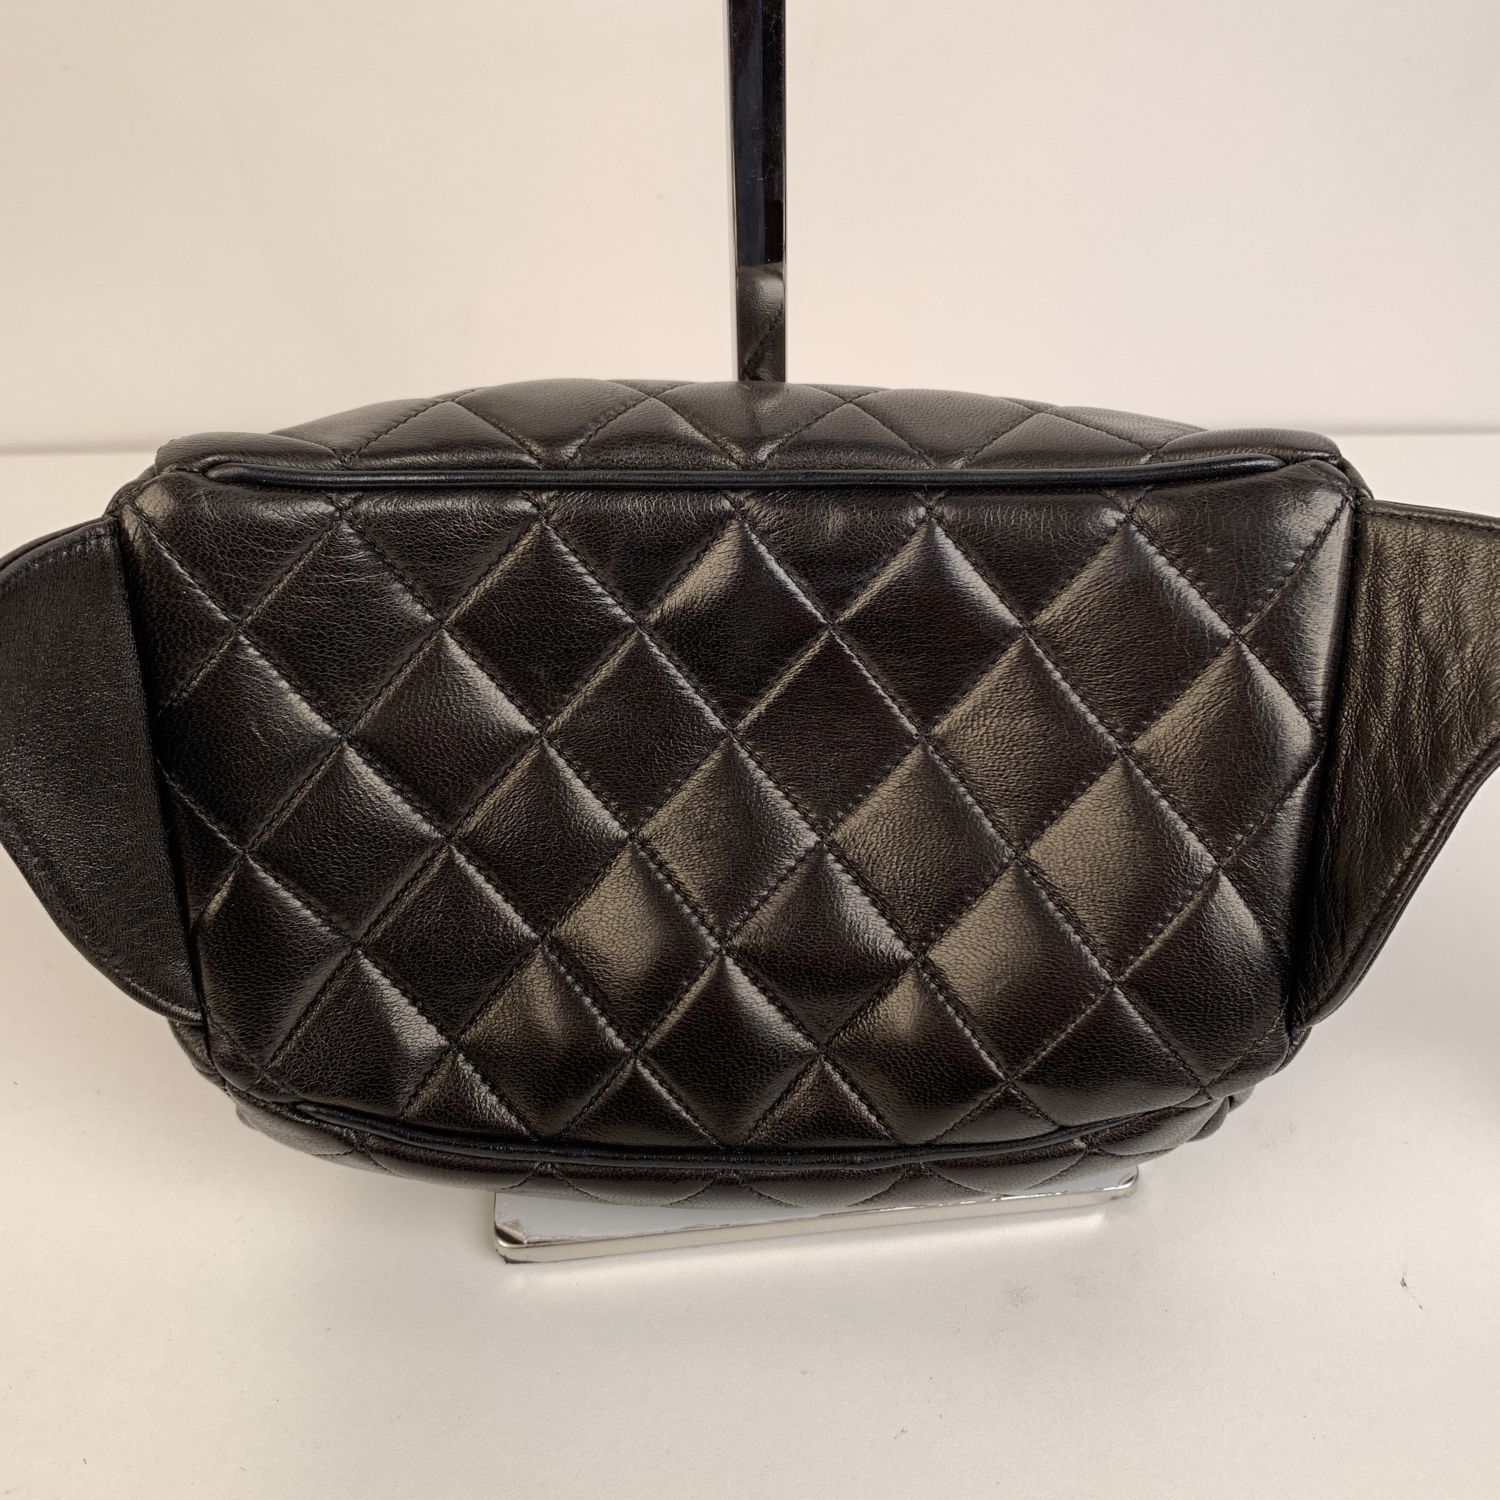 Chanel Vintage Black Quilted Waist Bum Bag Pouch - Image 6 of 10